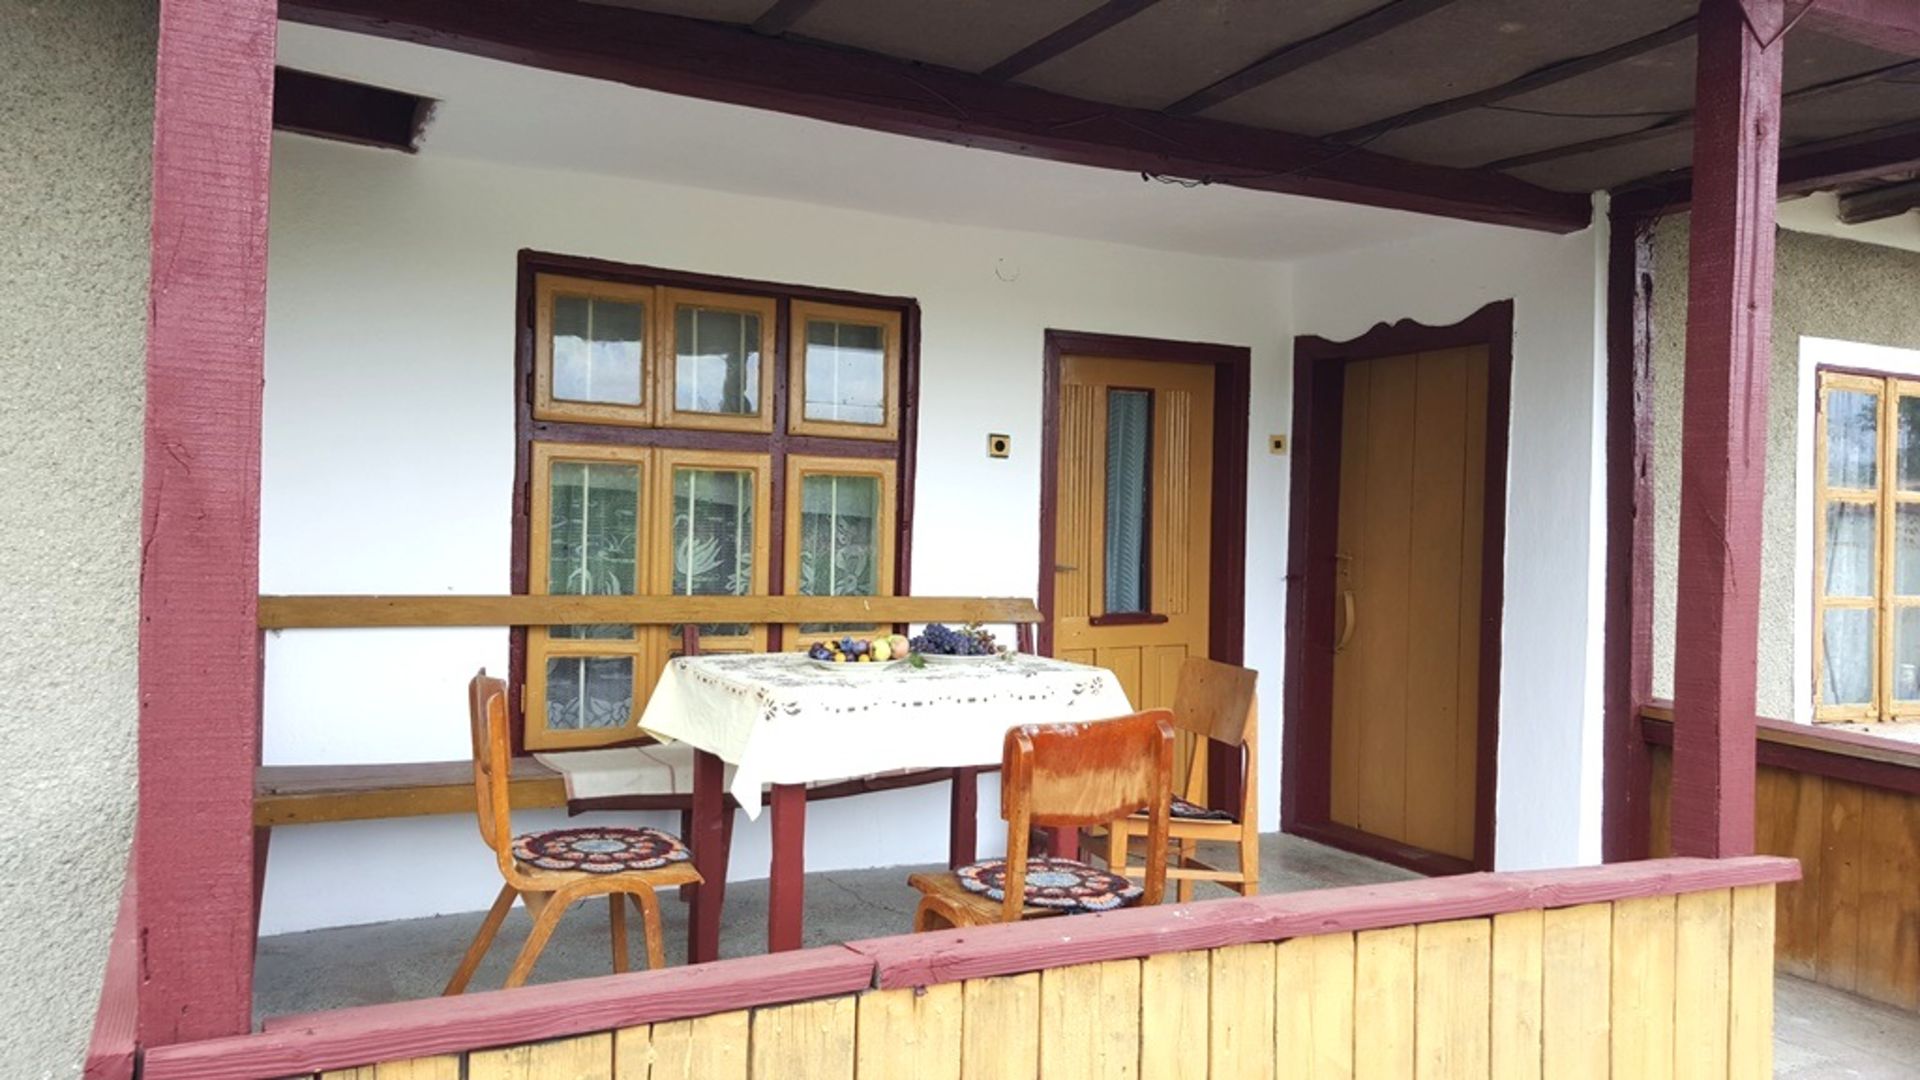 WISHING WELL COTTAGE Geshanovo, Dobrich, Bulgaria, 36 miles from Sea! - Image 7 of 59